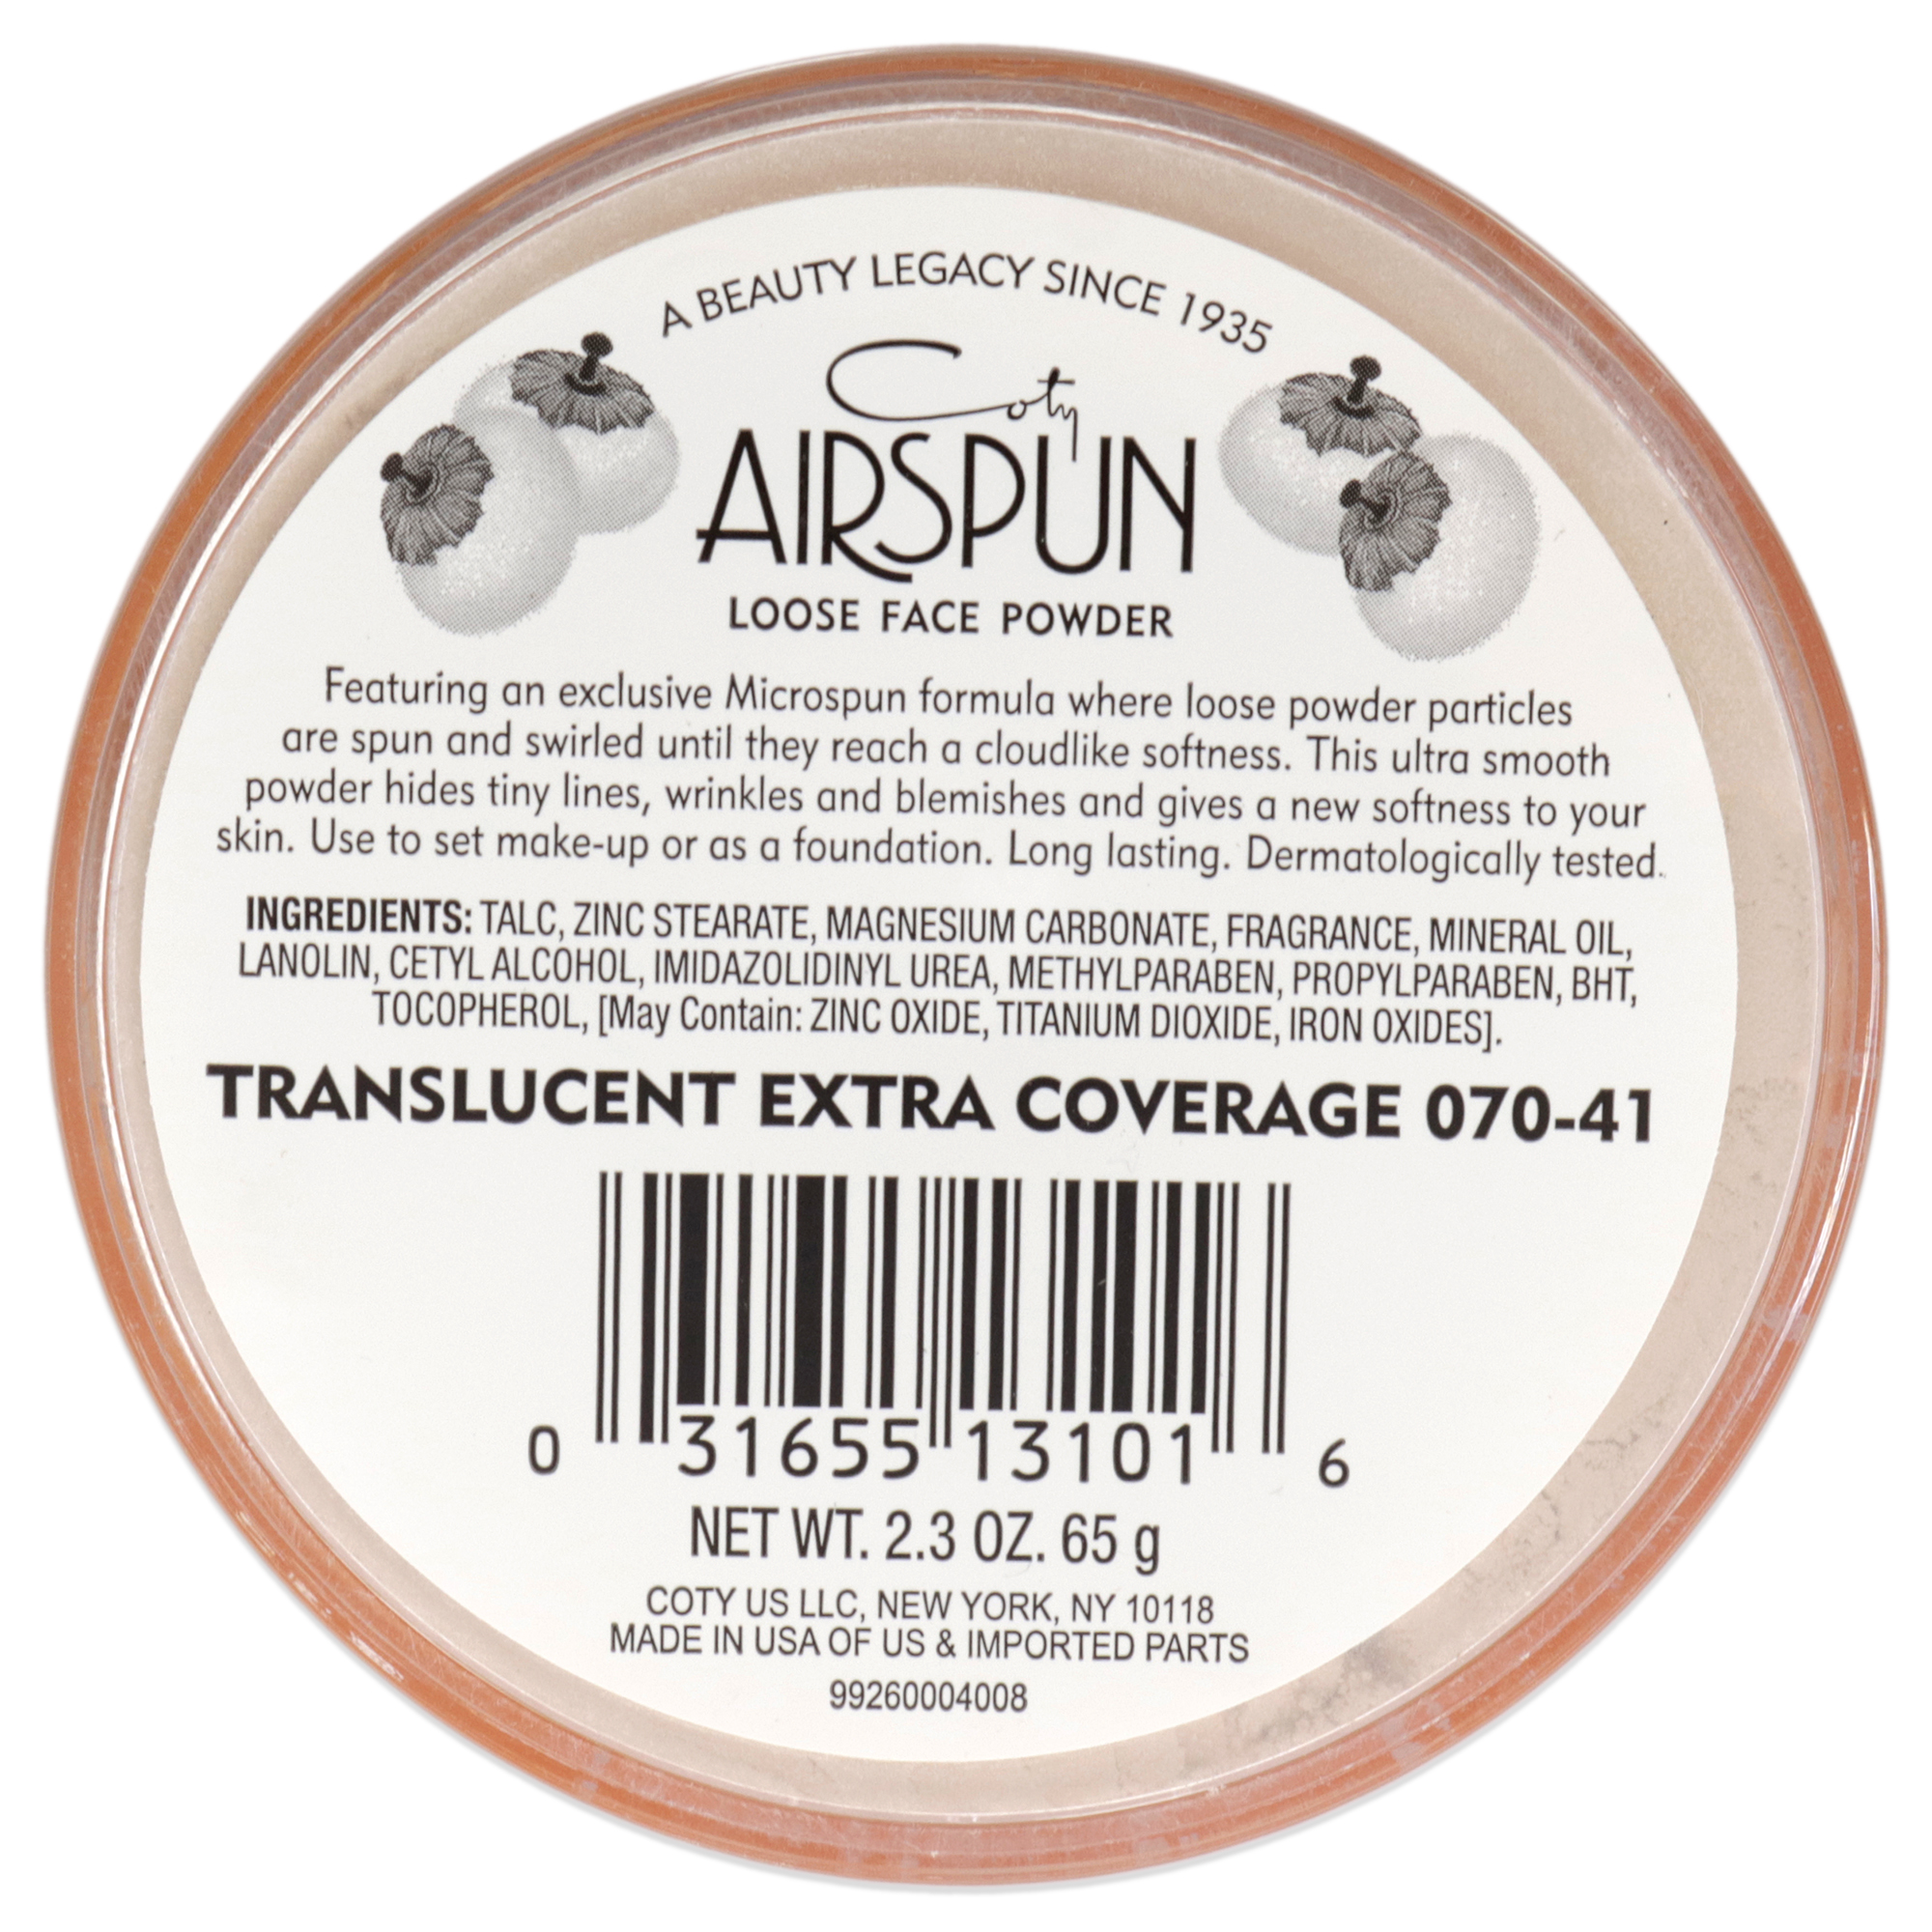 Coty Airspun Loose Face Powder, 041 Translucent Extra Coverage, 2.3 oz - image 2 of 3